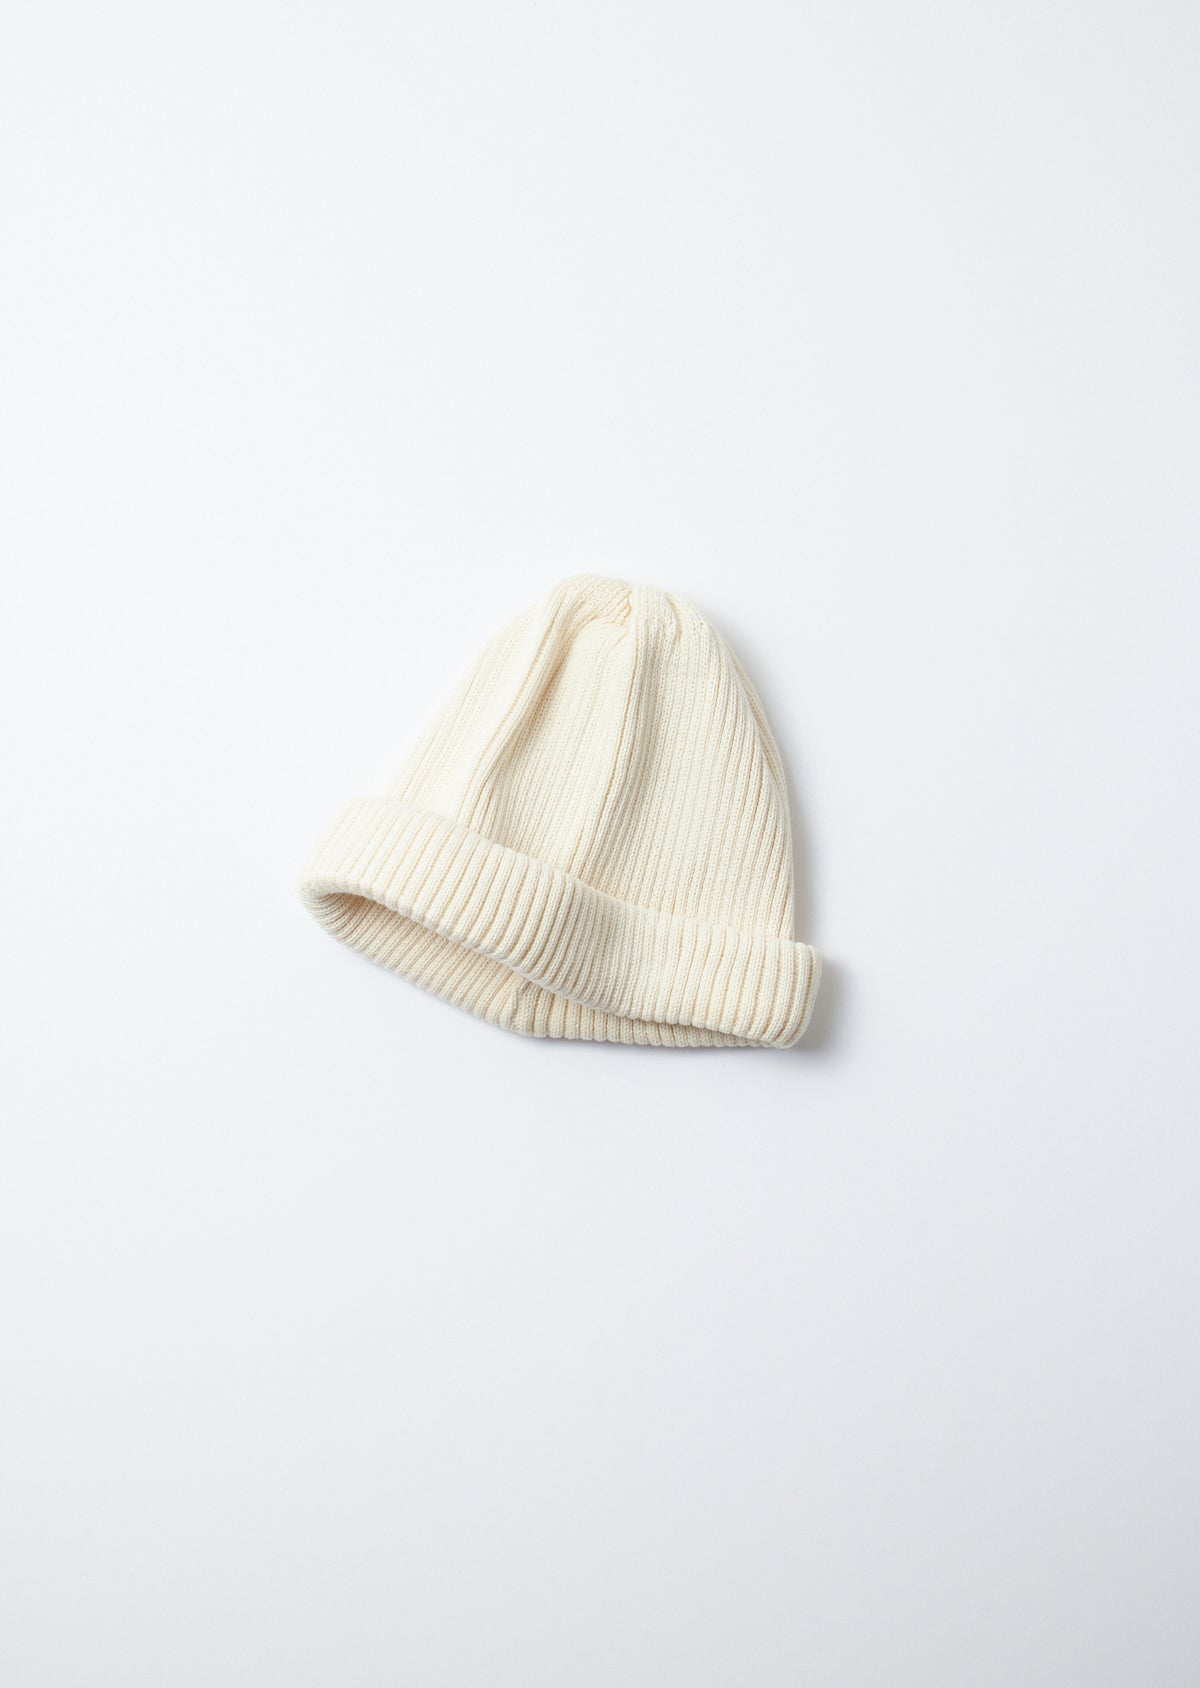 RoToTo COTTON ROLL UP BEANIE